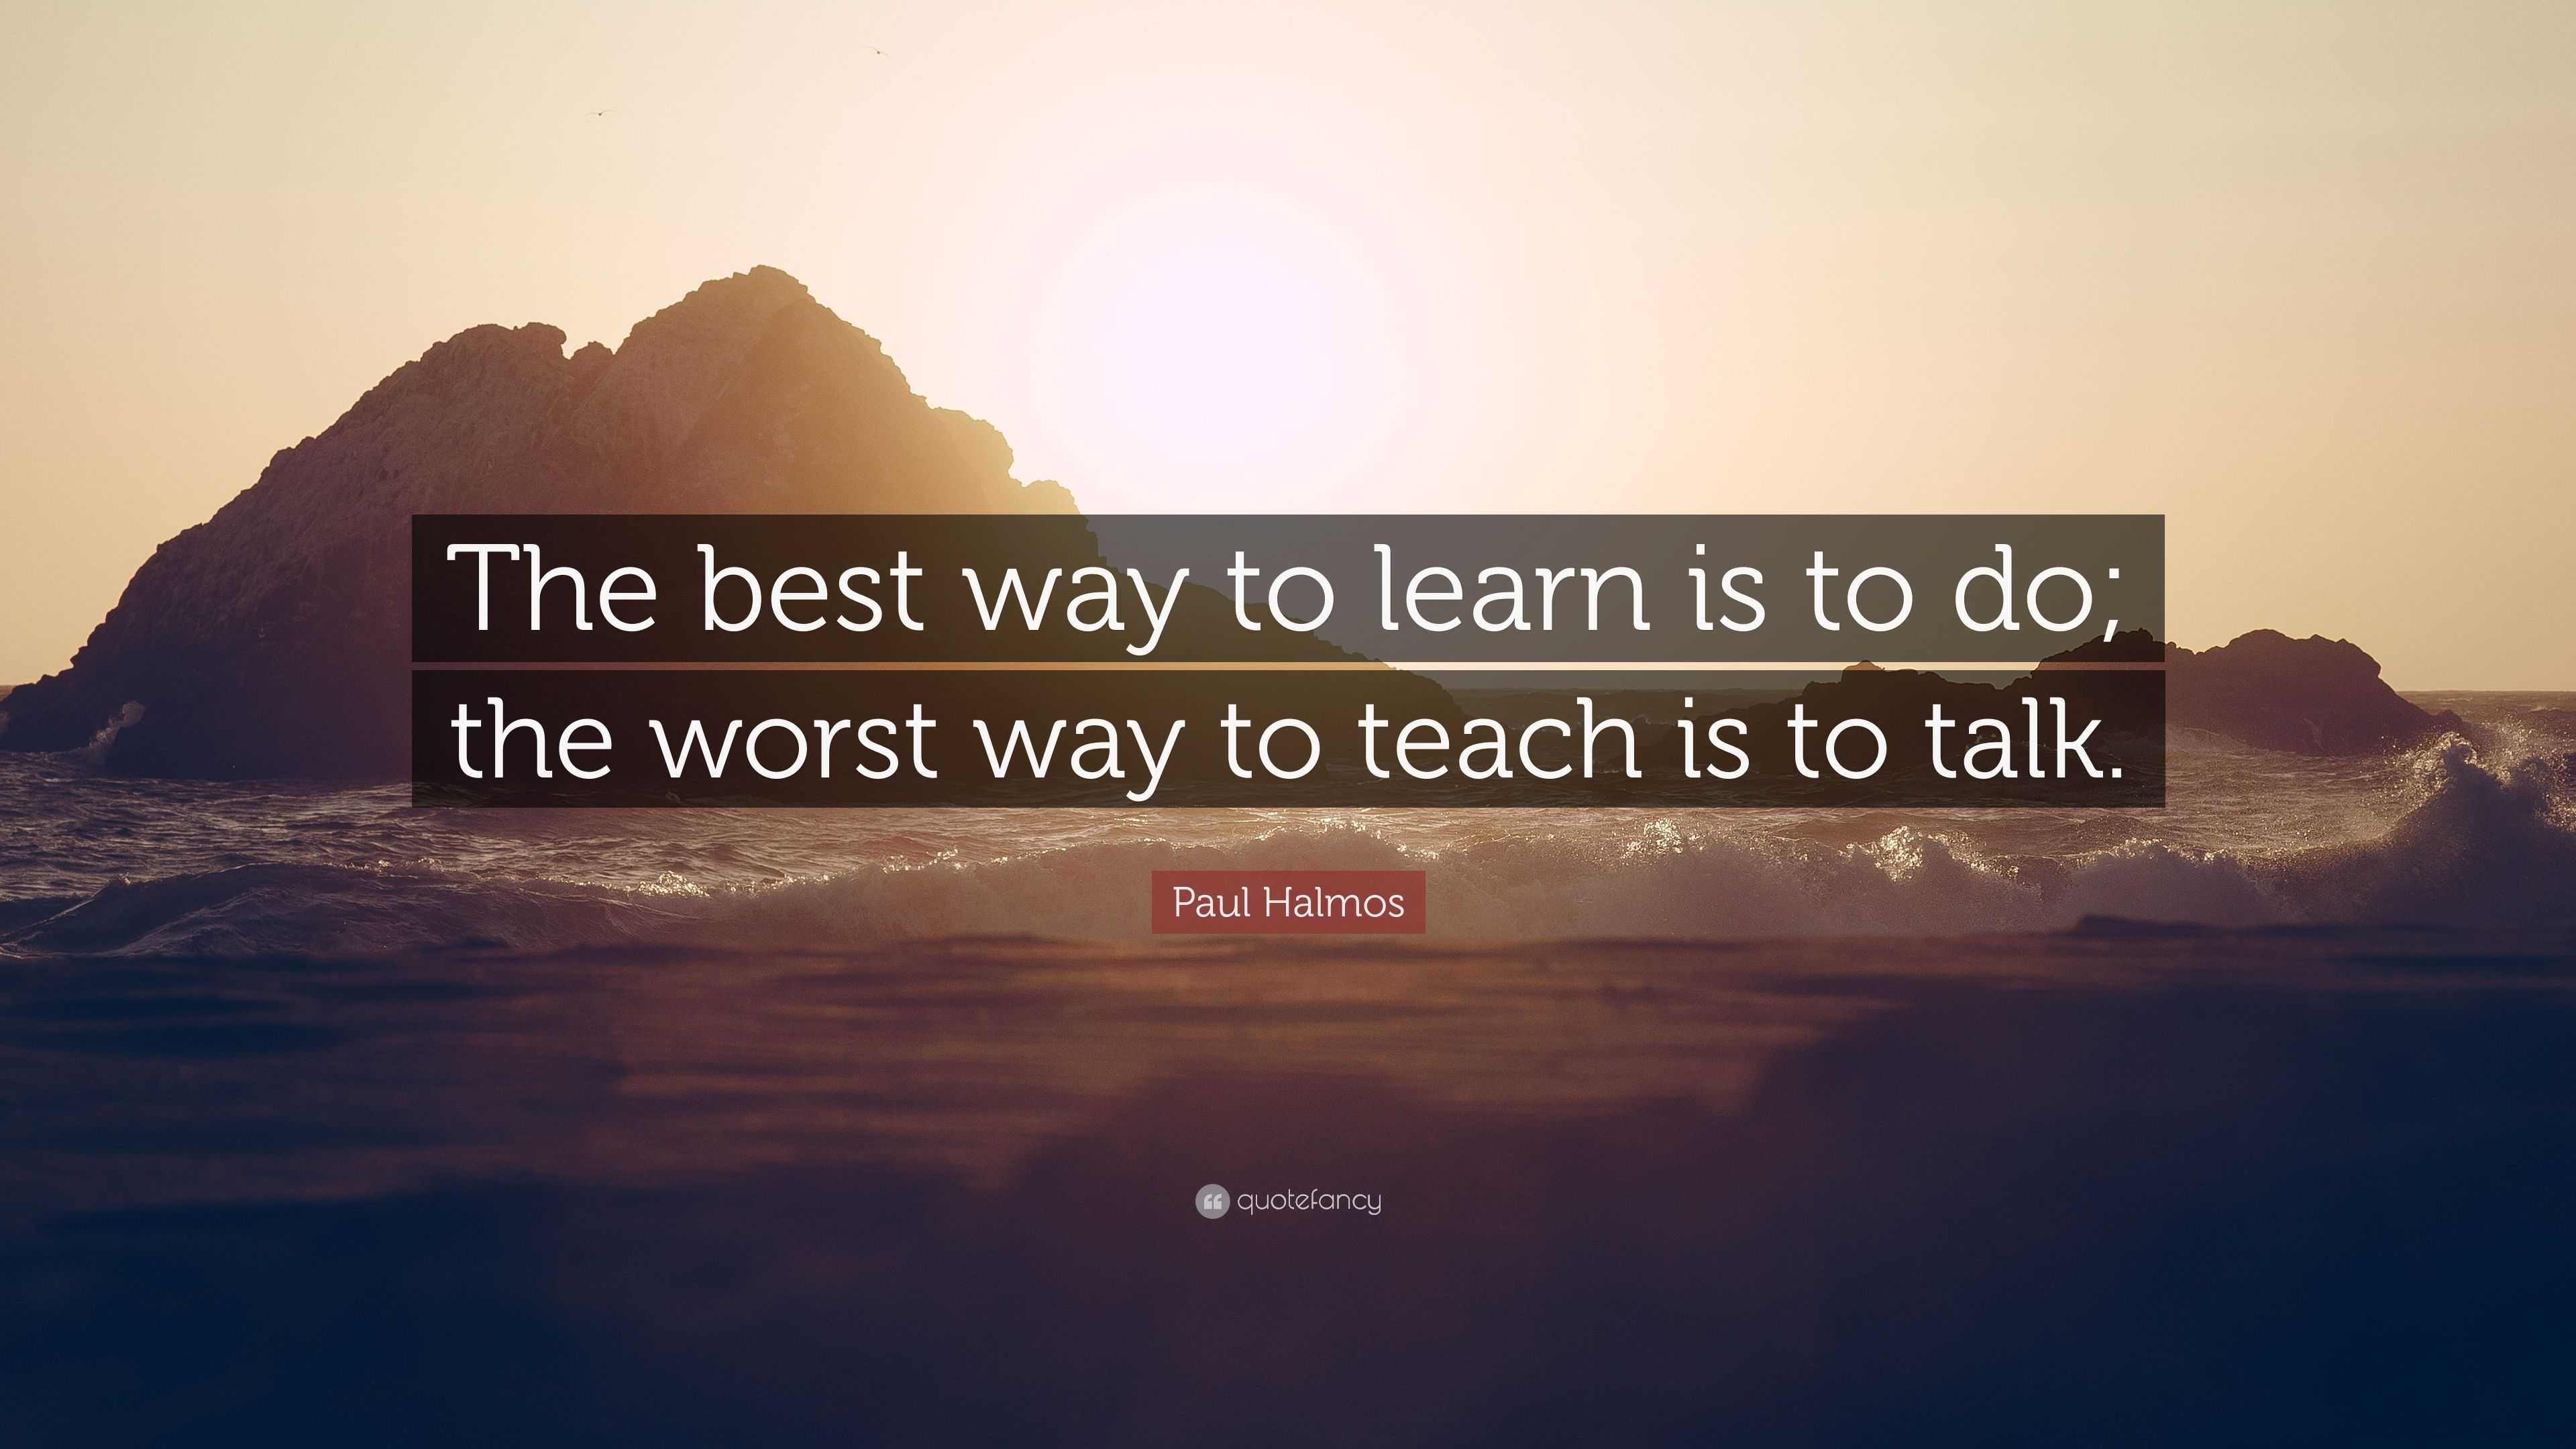 Paul Halmos Quote: "The best way to learn is to do; the worst way to 